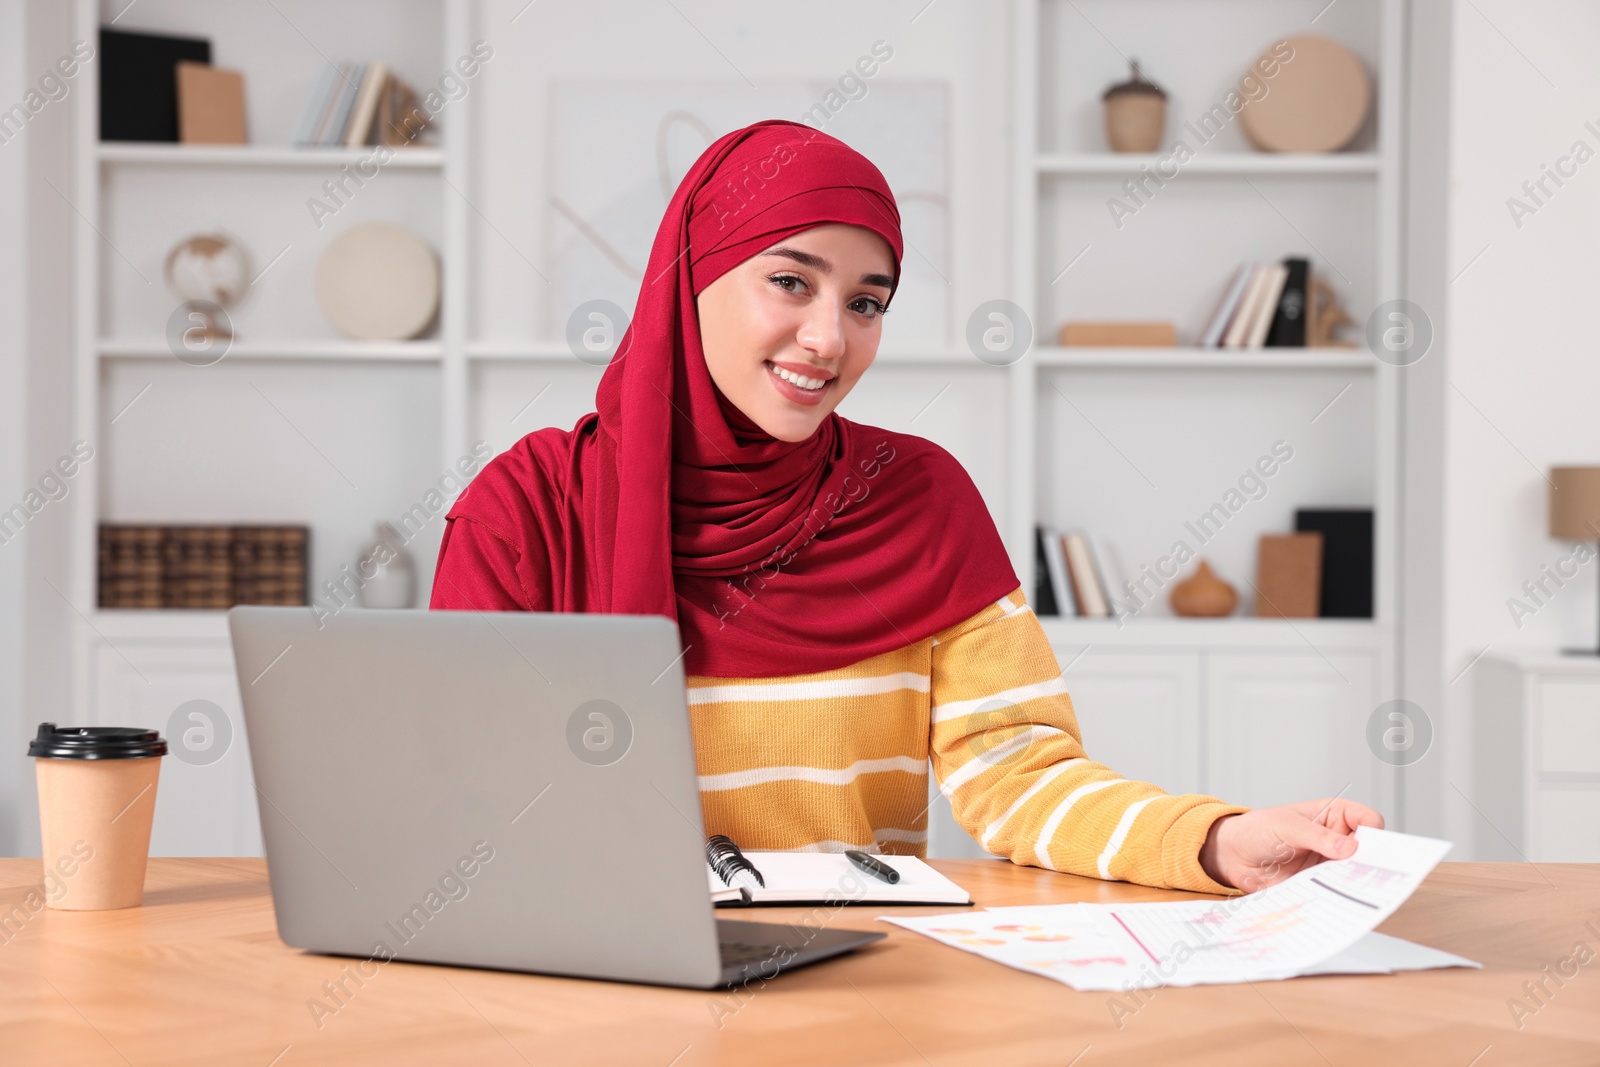 Photo of Muslim woman writing notes near laptop at wooden table at home